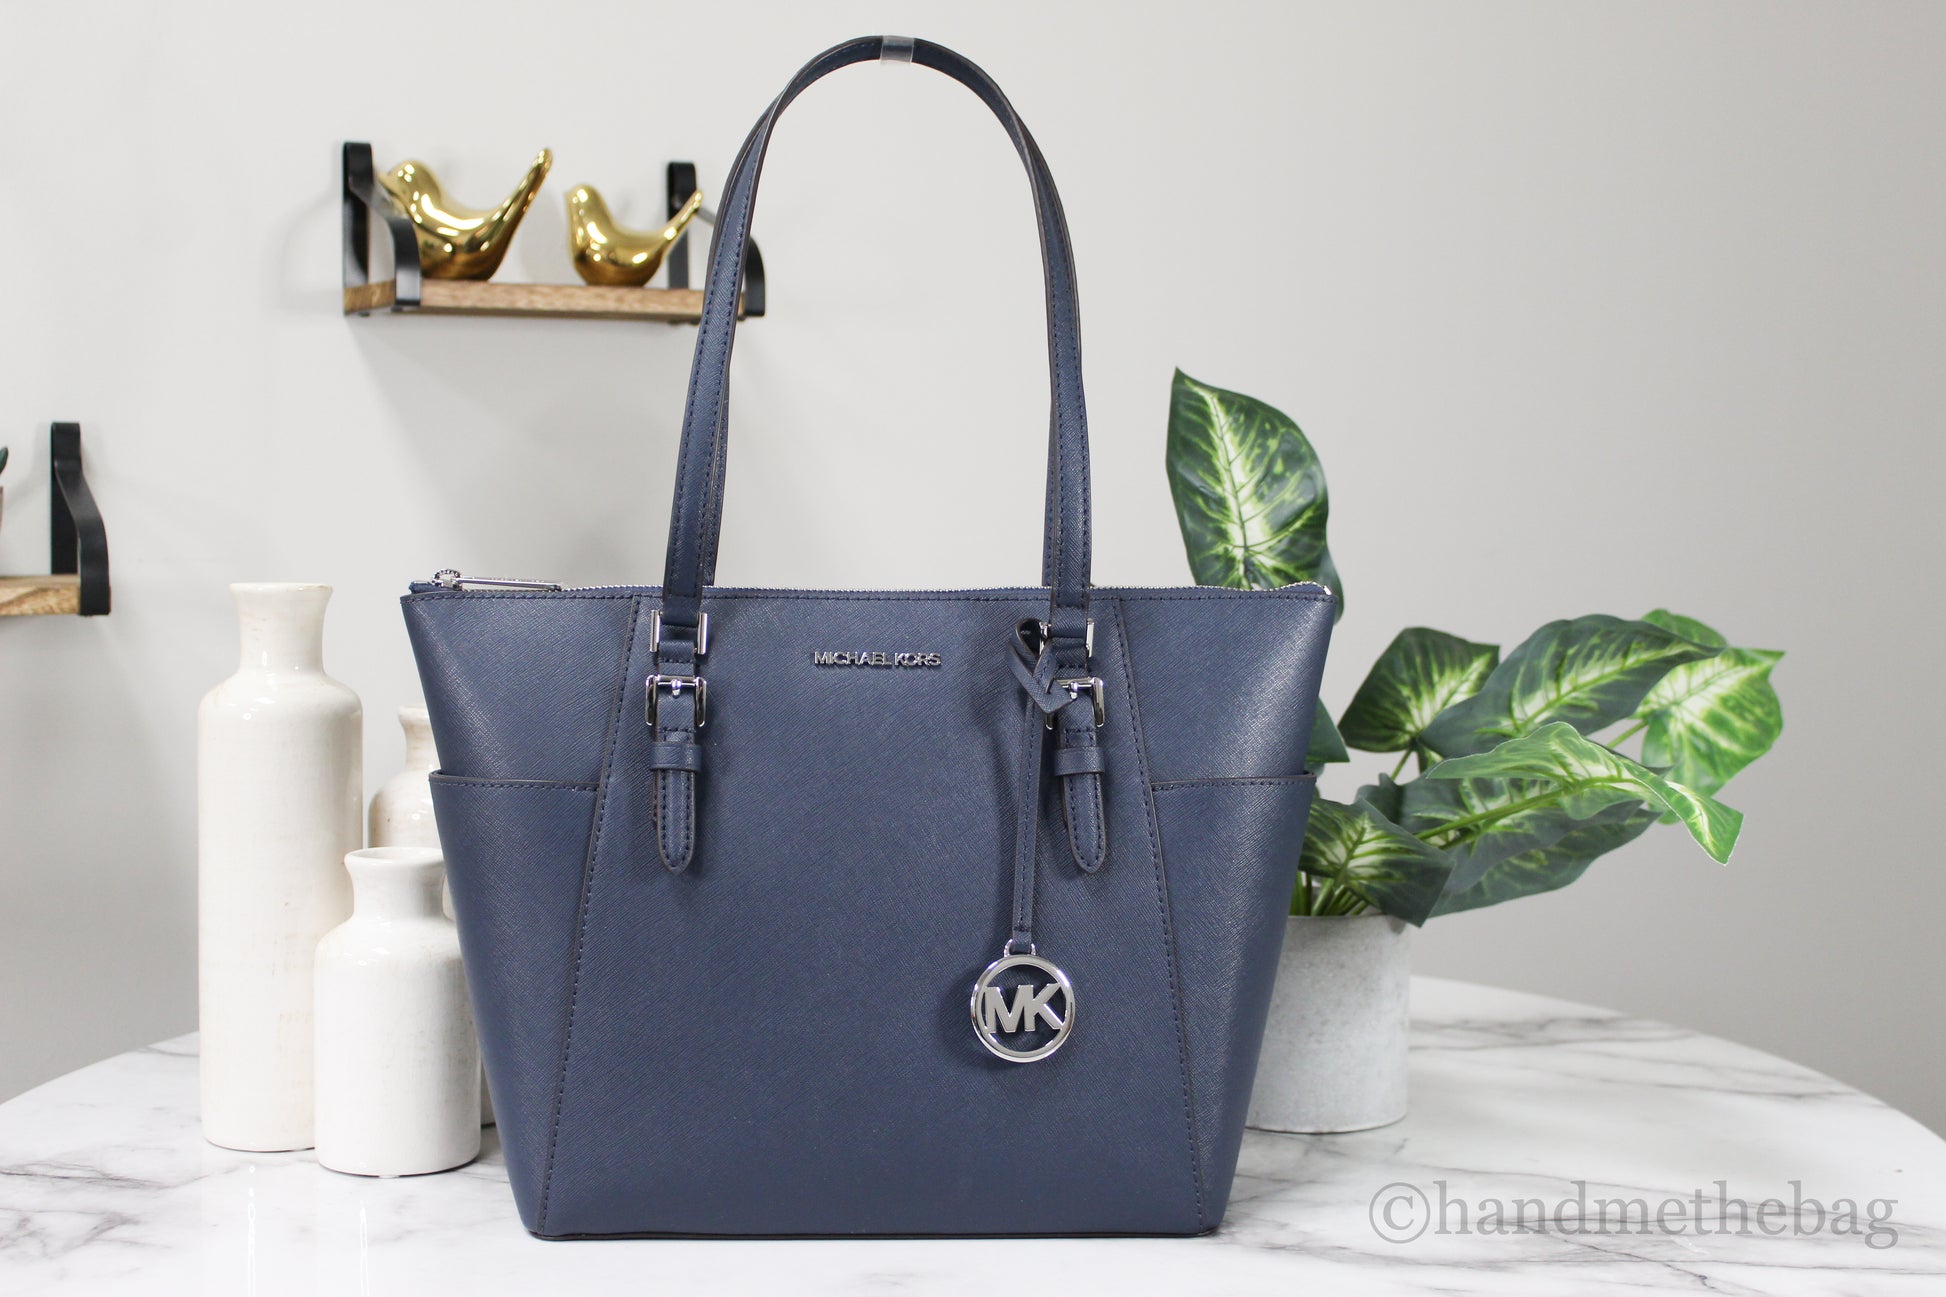 Michael Kors Charlotte Navy Leather Large Top Zip Tote